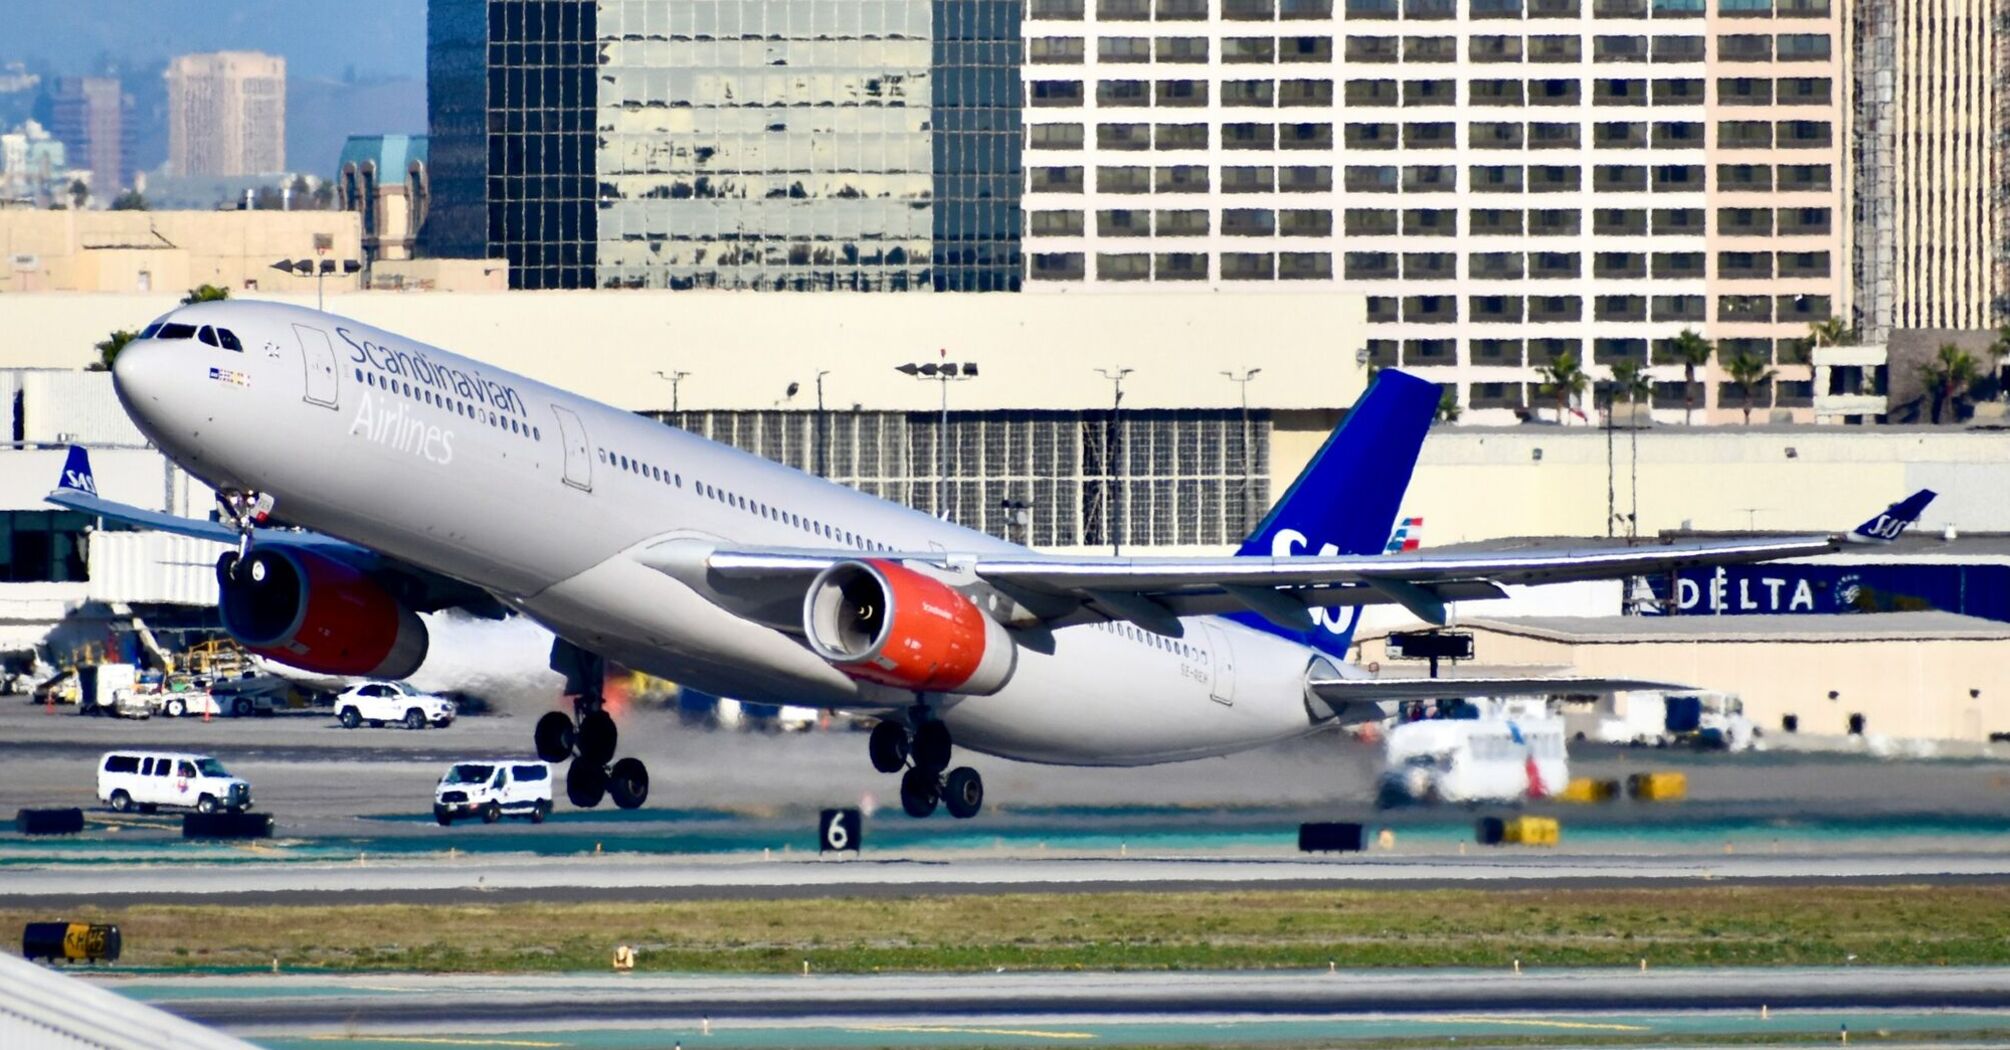 SAS airplane taking off from a city airport